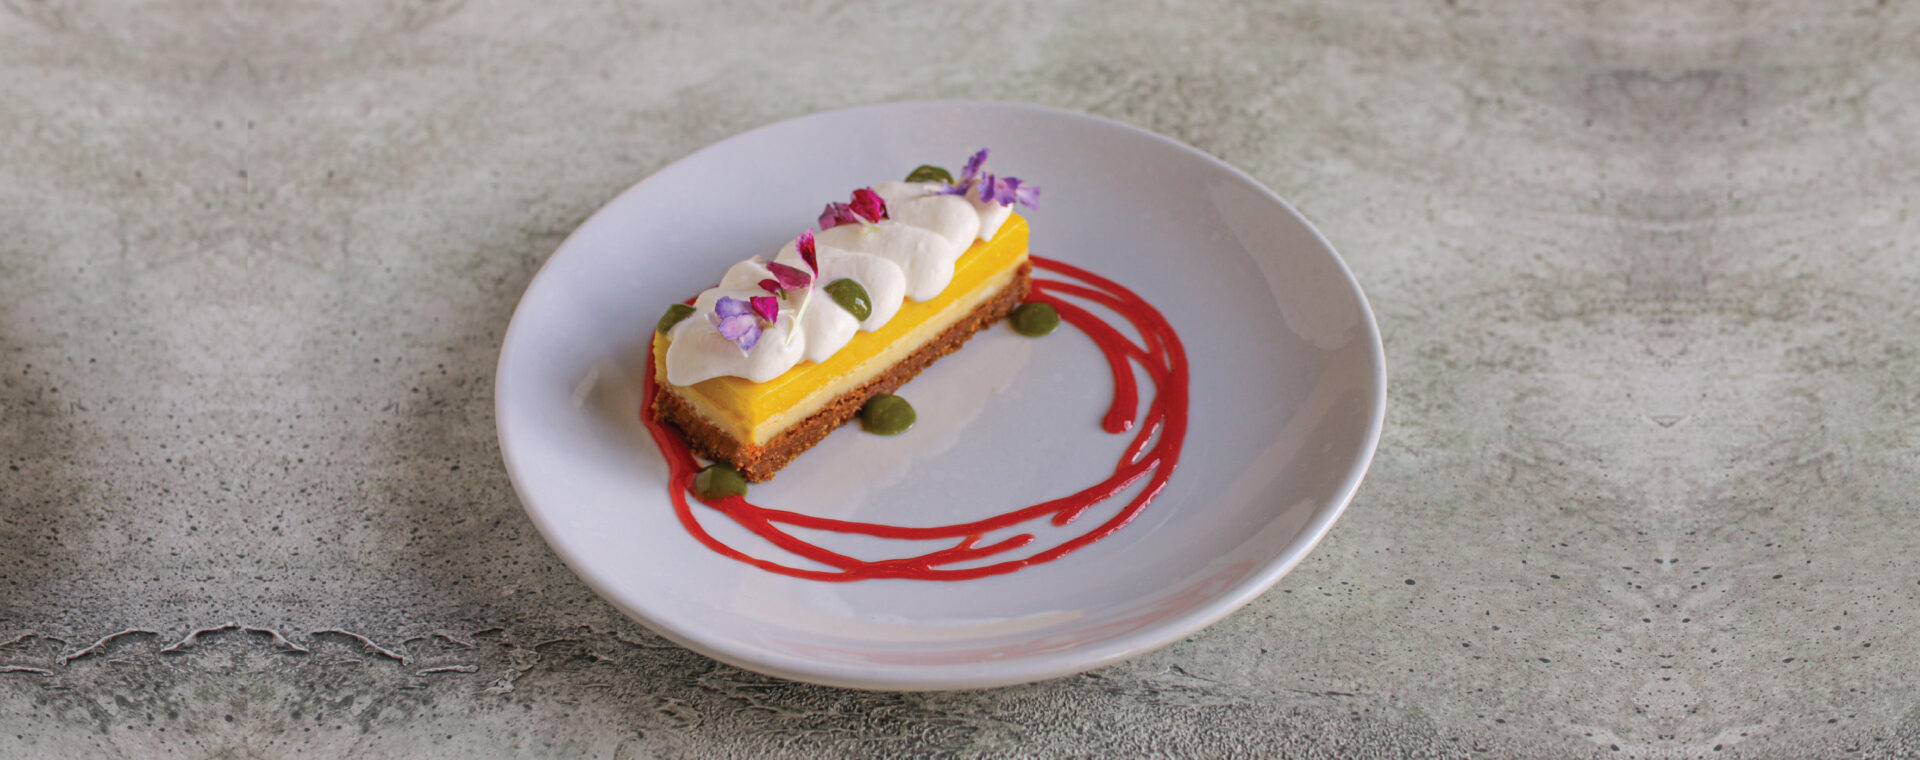 A slice of Lemon Basil Cheesecake on an off-white shiny dessert plate on a concrete background.